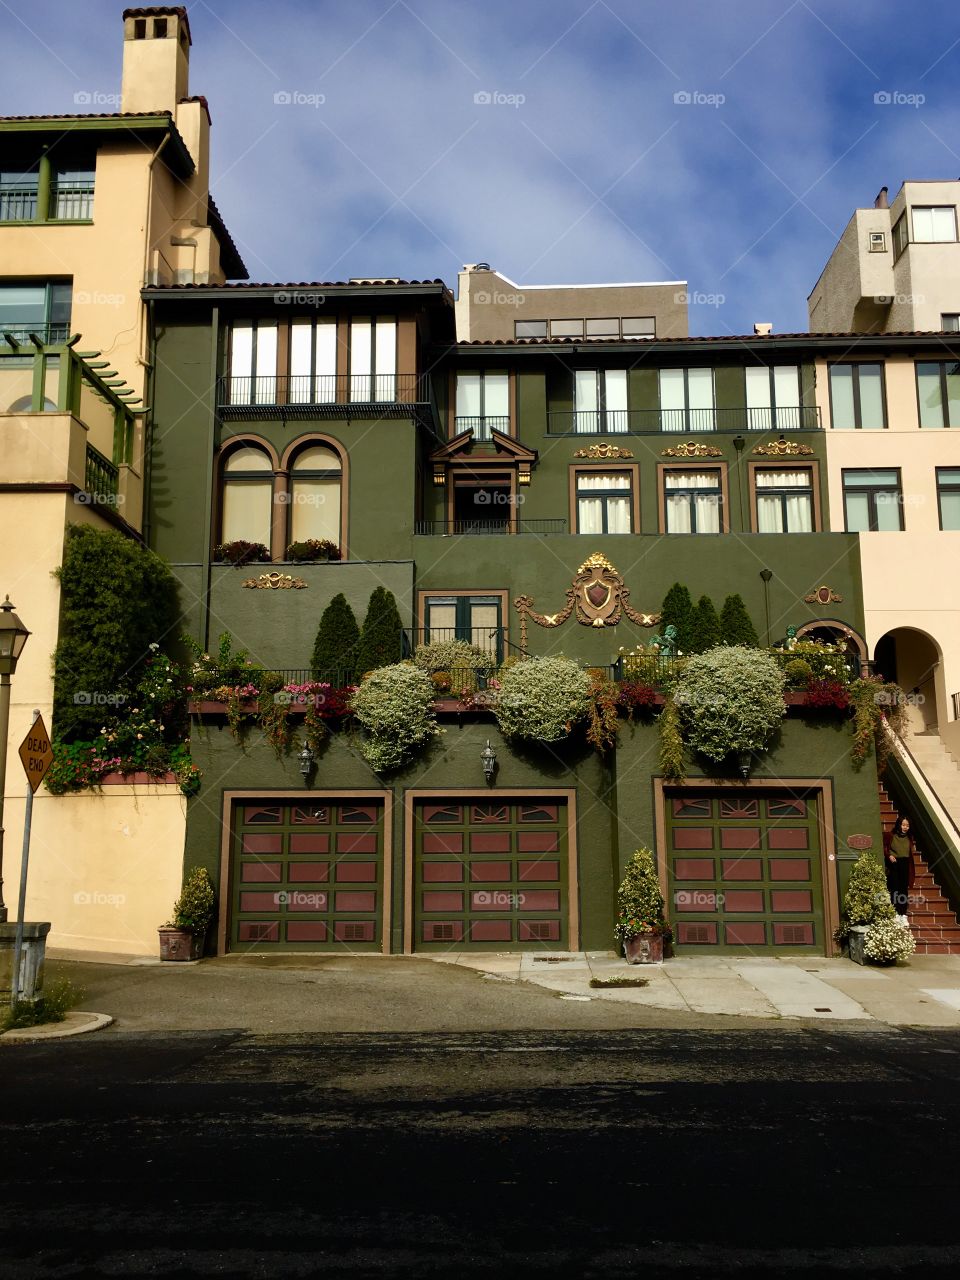 San Fran houses are awesome!